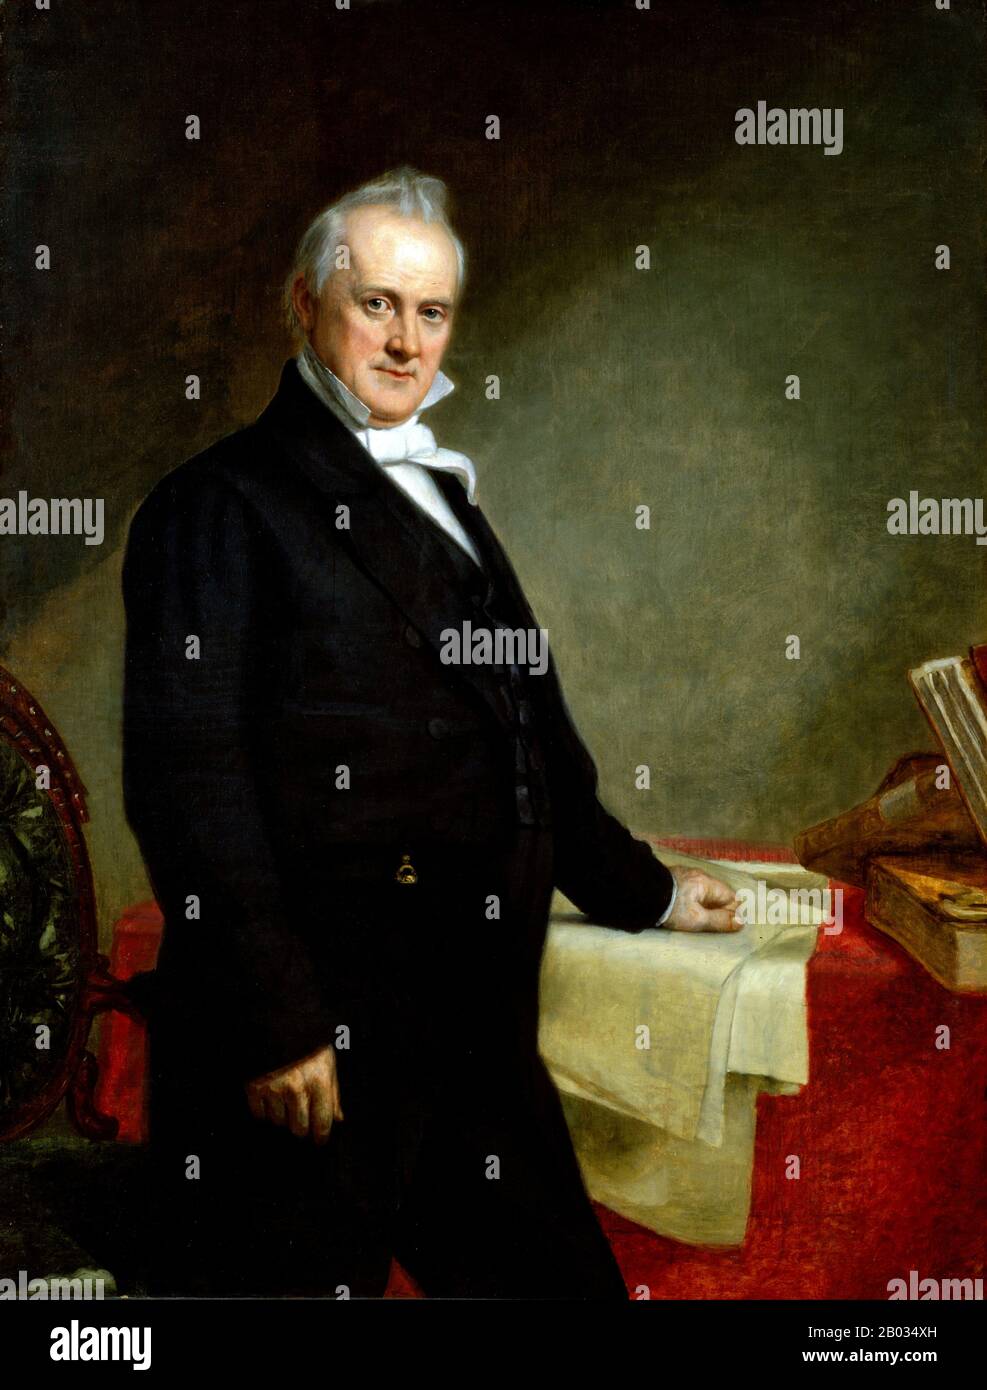 James Buchanan, Jr. (April 23, 1791 – June 1, 1868) was the 15th President of the United States (1857–61), serving immediately prior to the American Civil War. He represented Pennsylvania in the United States House of Representatives and later the Senate, then served as Minister to Russia under President Andrew Jackson.  He was named Secretary of State under President James K. Polk, and as of 2016 is the last former Secretary of State to serve as President of the United States. After Buchanan turned down an offer to sit on the Supreme Court, President Franklin Pierce appointed him Ambassador t Stock Photo